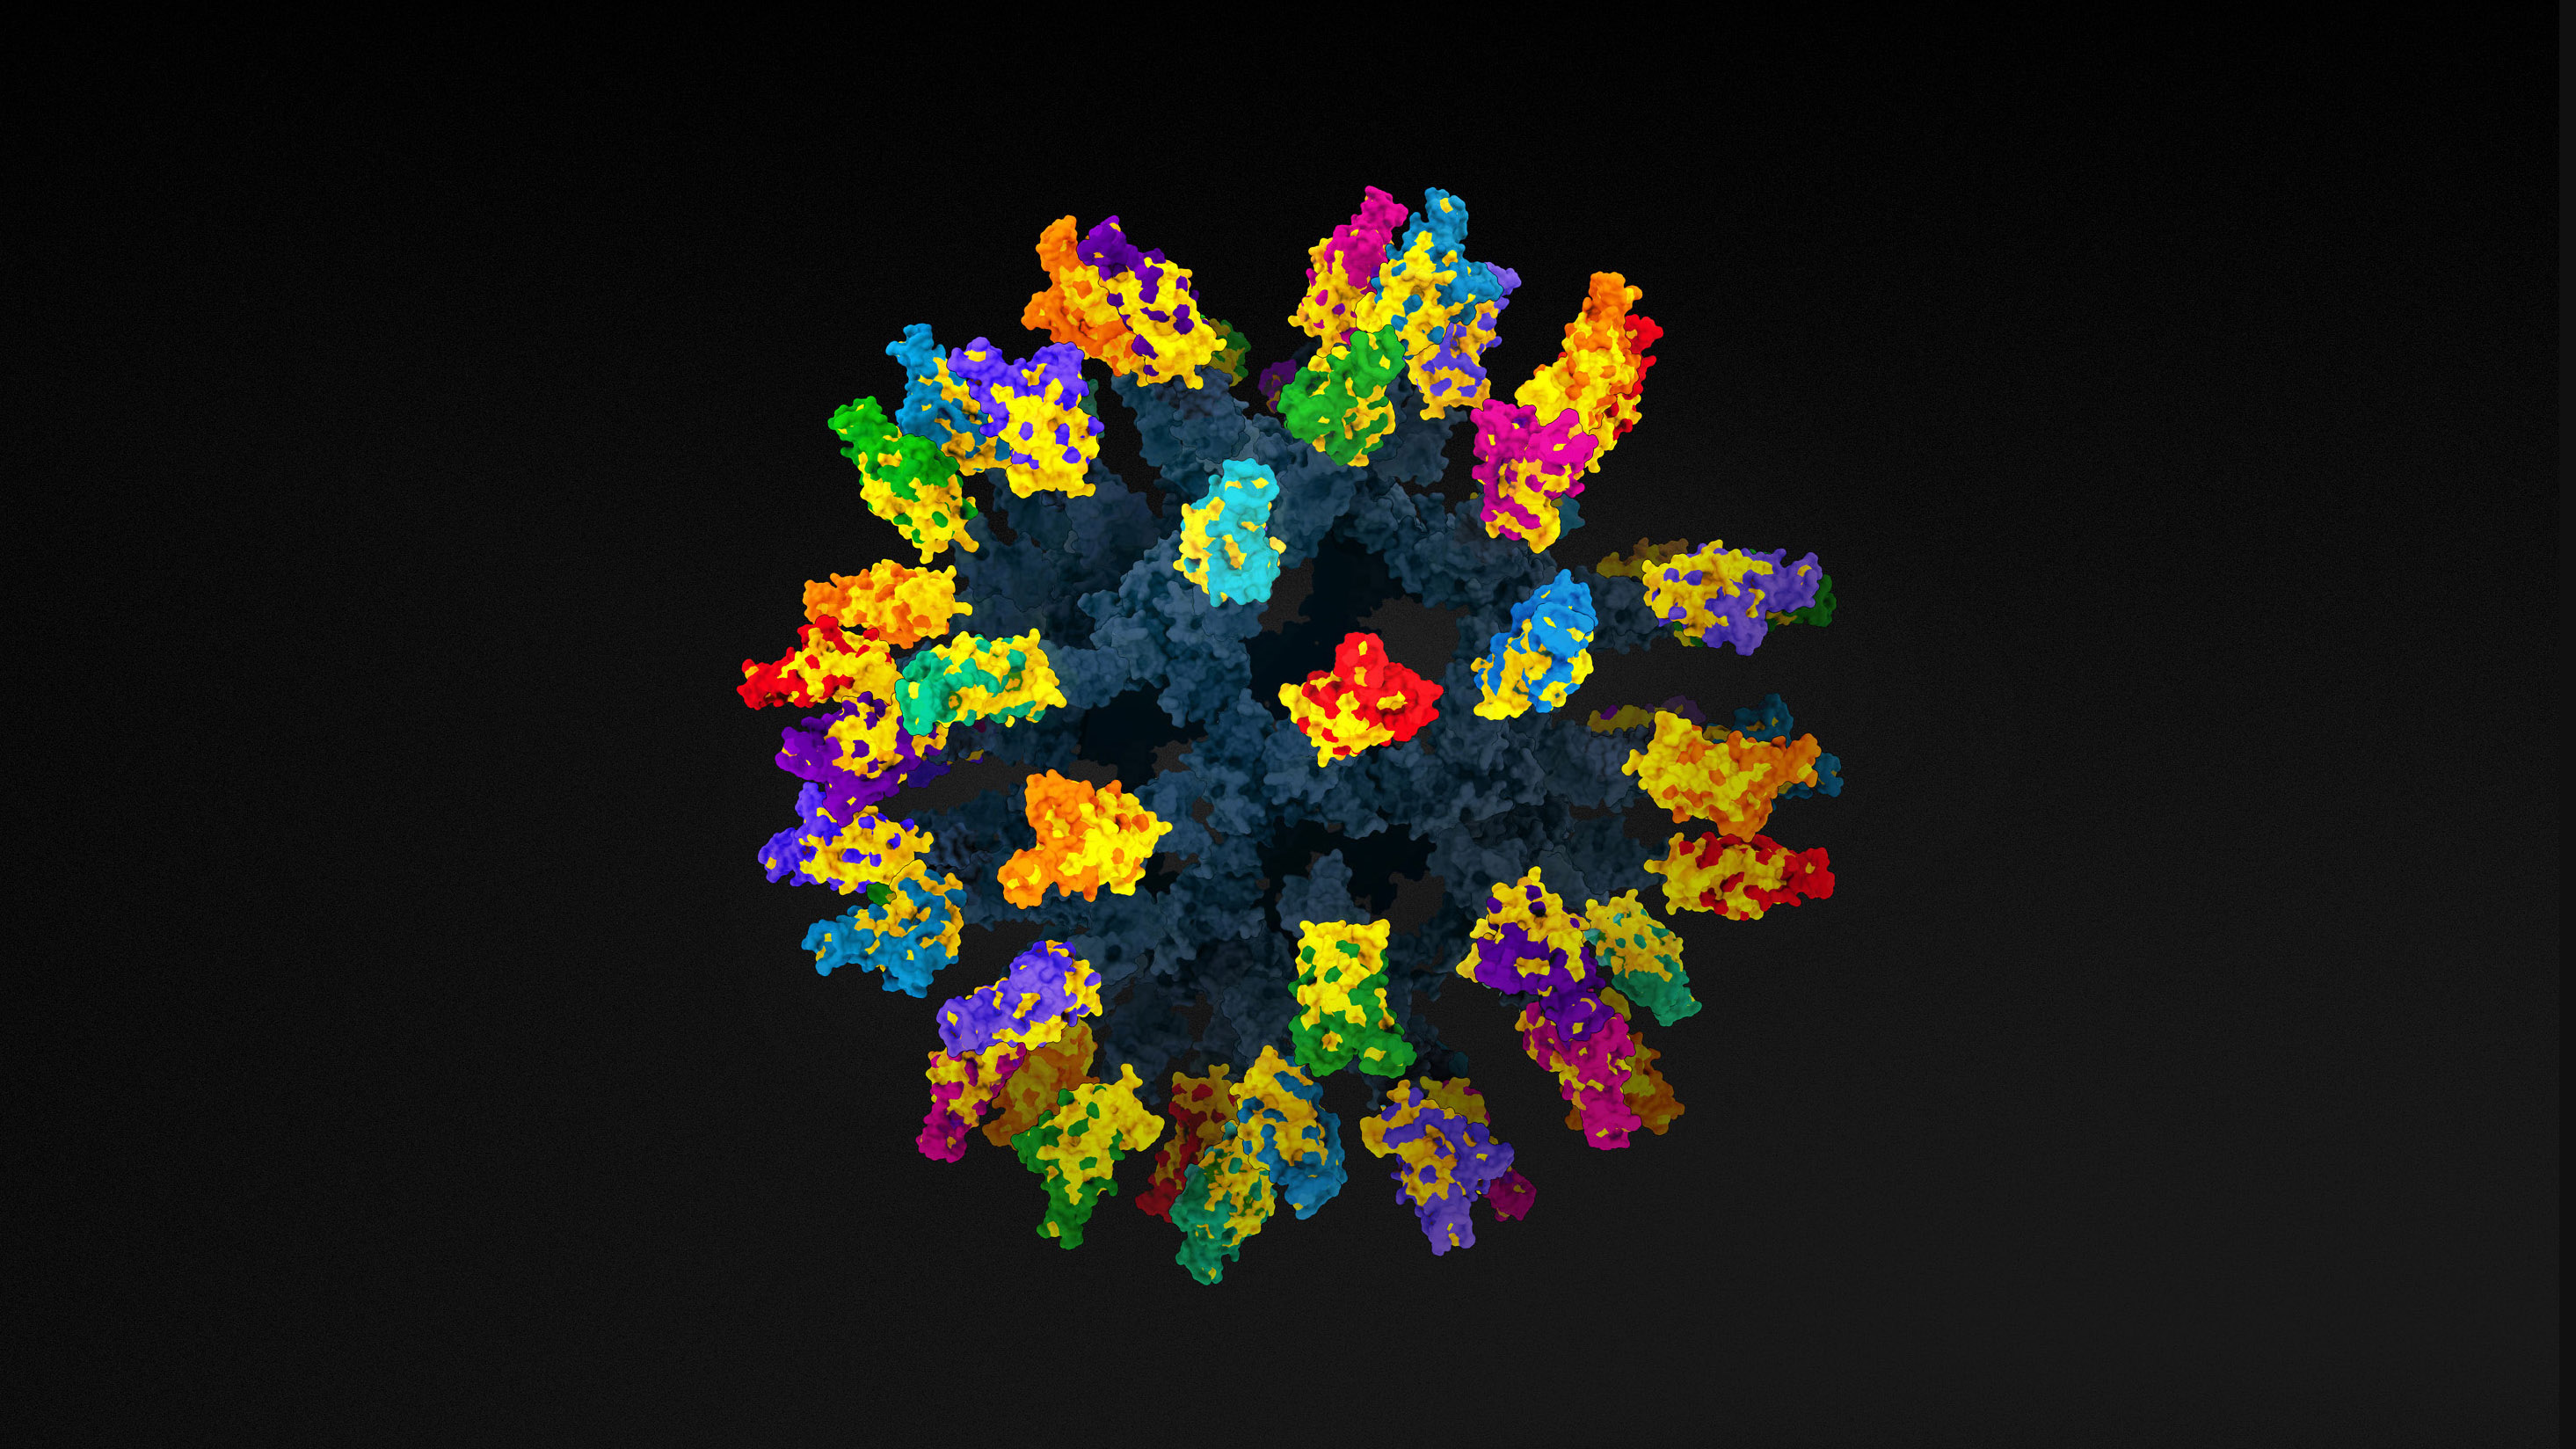 3D model of the mosaic nanoparticle vaccine